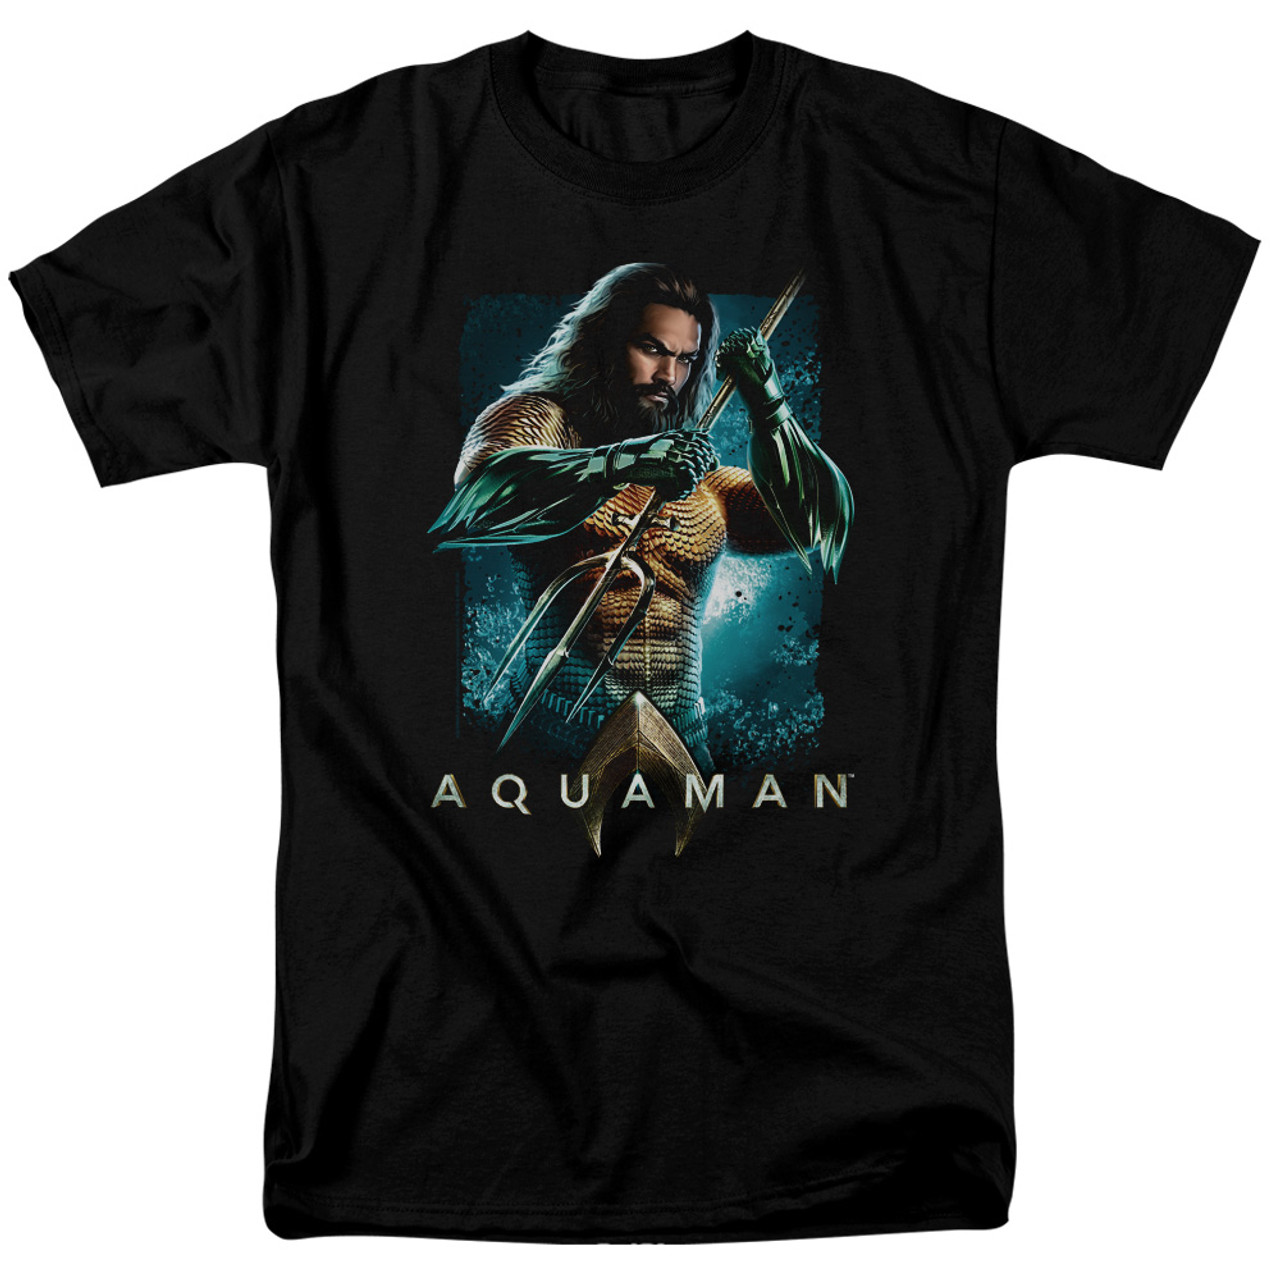 Aquaman Drawing T-Shirt - A Wrinkle In Time